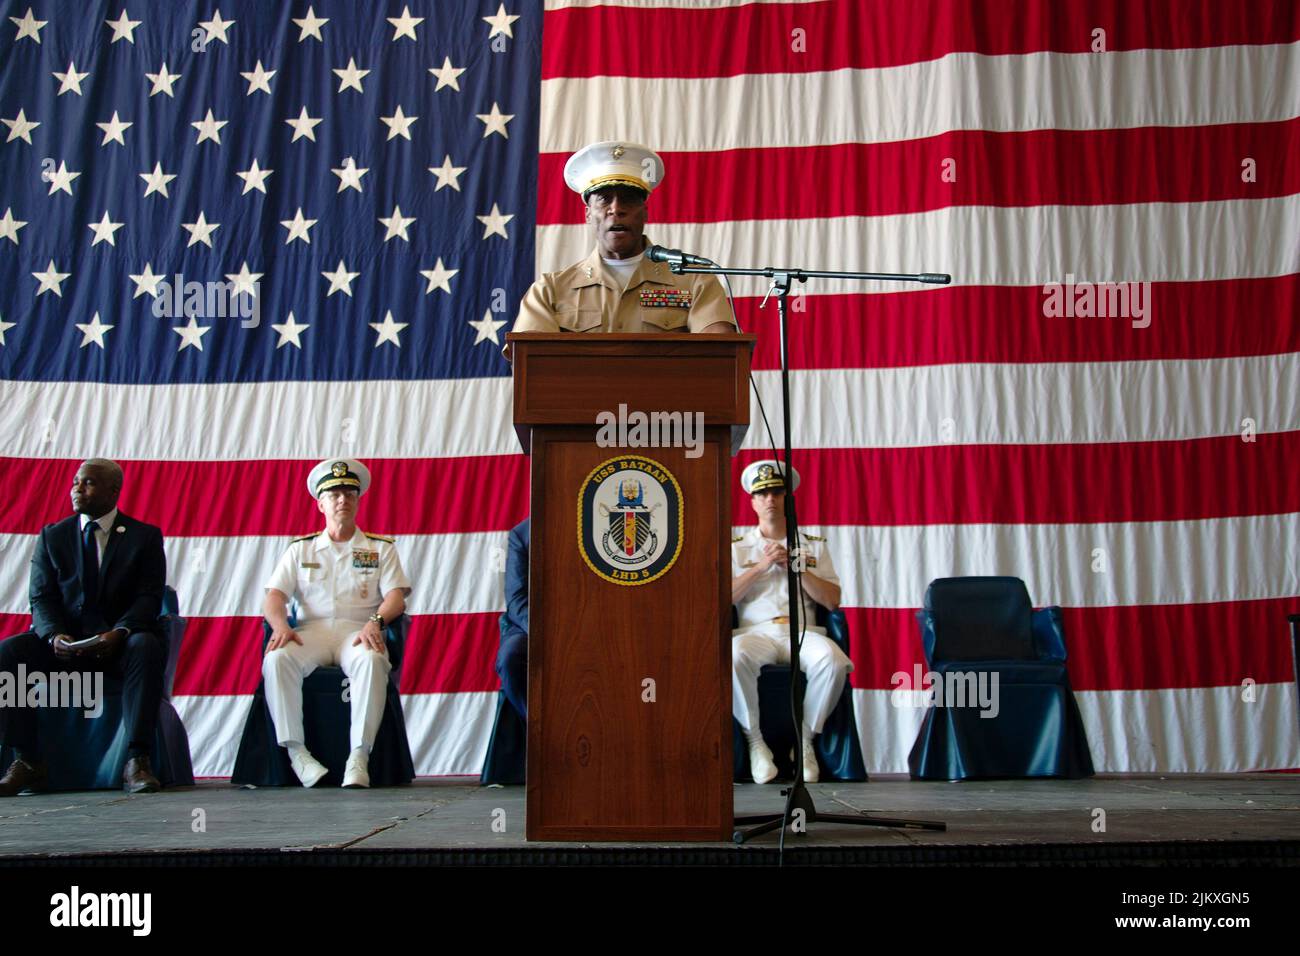 U.S. Marine Corps Lt. Gen. Michael E. Langley, commanding general of Marine Forces Command, addresses guests aboard the USS Bataan during an opening ceremony at Fleet Week New York, May 25, 2022 in New York City. Langley will become the first Black four-star general in the Marines 246-year history, after the Senate confirmed his promotion August 3rd, 2022. Stock Photo